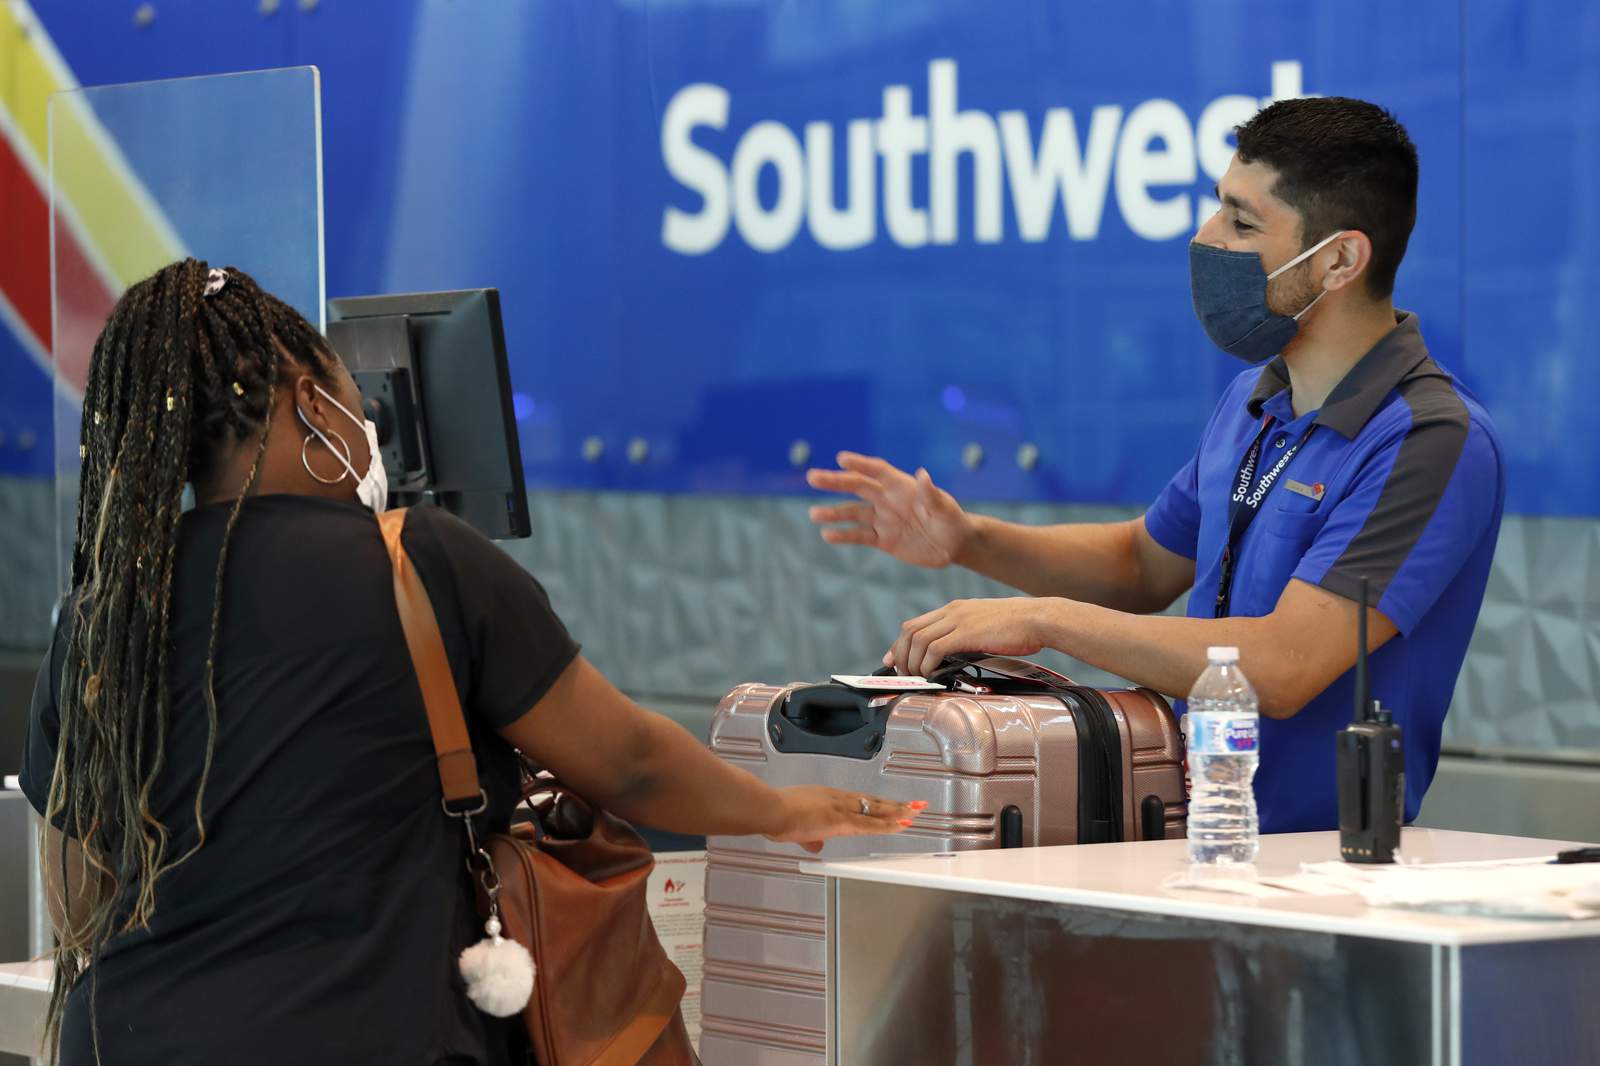 As virus cases rise, Southwest sees slower travel recovery